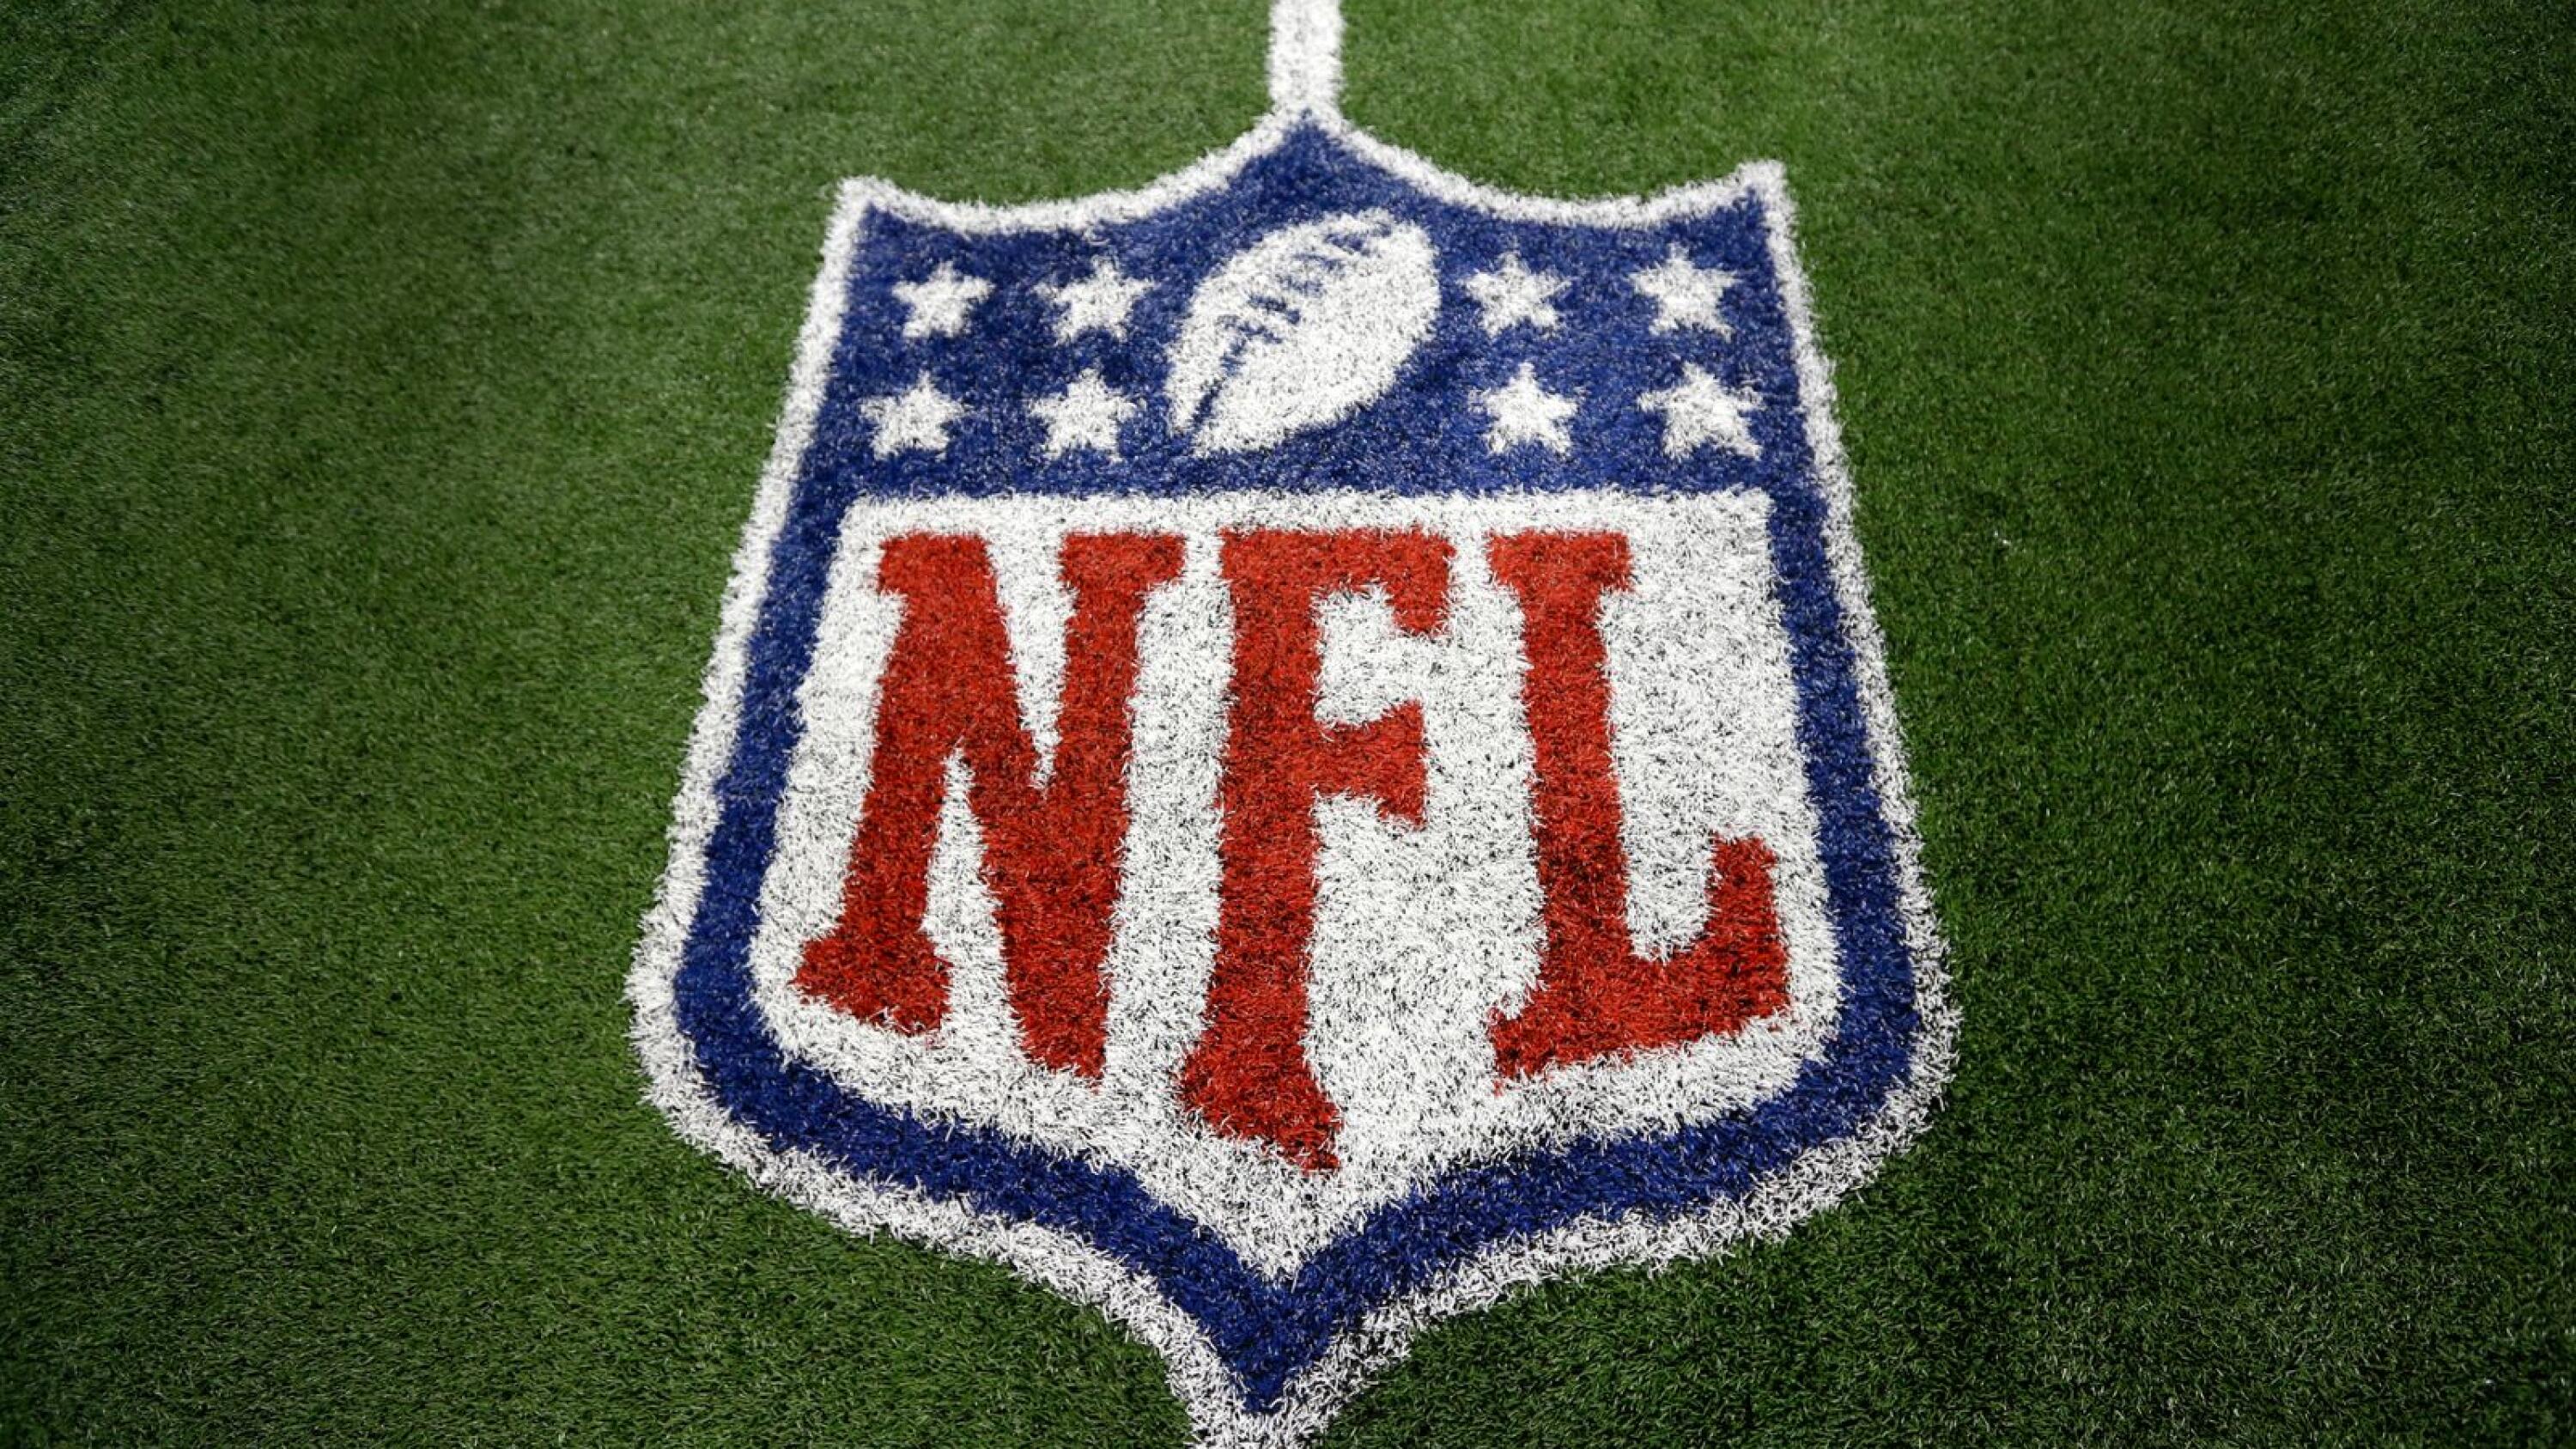 NFL Network and NFL RedZone will be offered direct to consumer on 'NFL+'  service